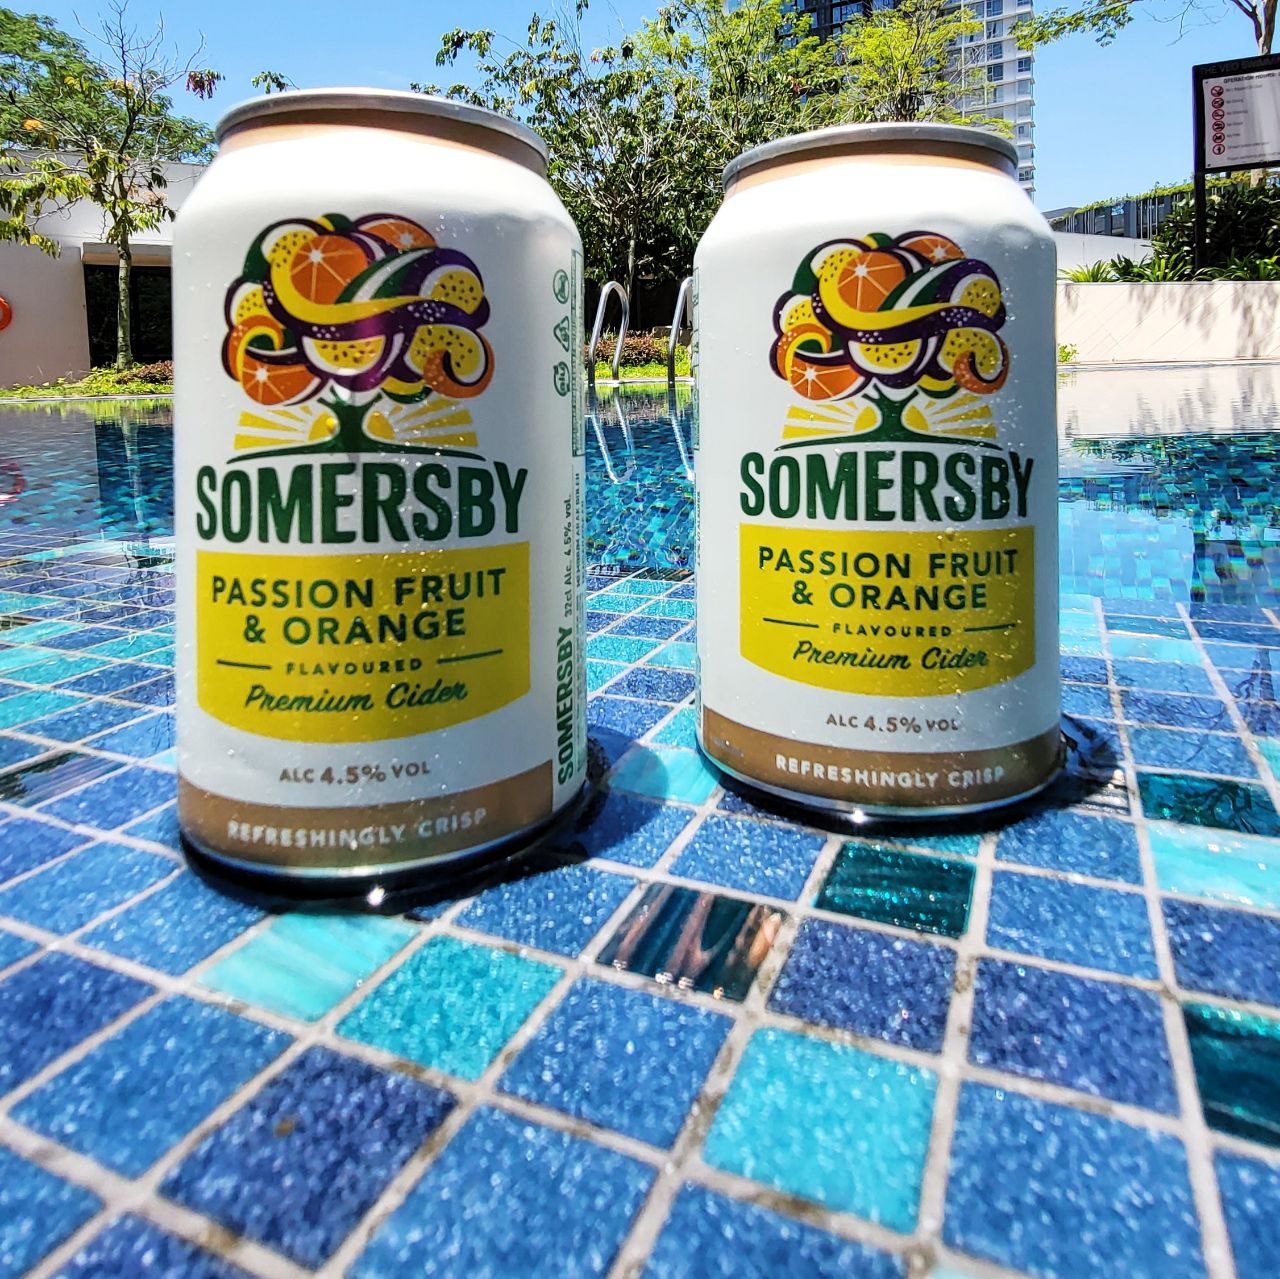 Somersby has introduced its brand-new Passion Fruit & Orange flavour in Malaysia! Source: Wau Post